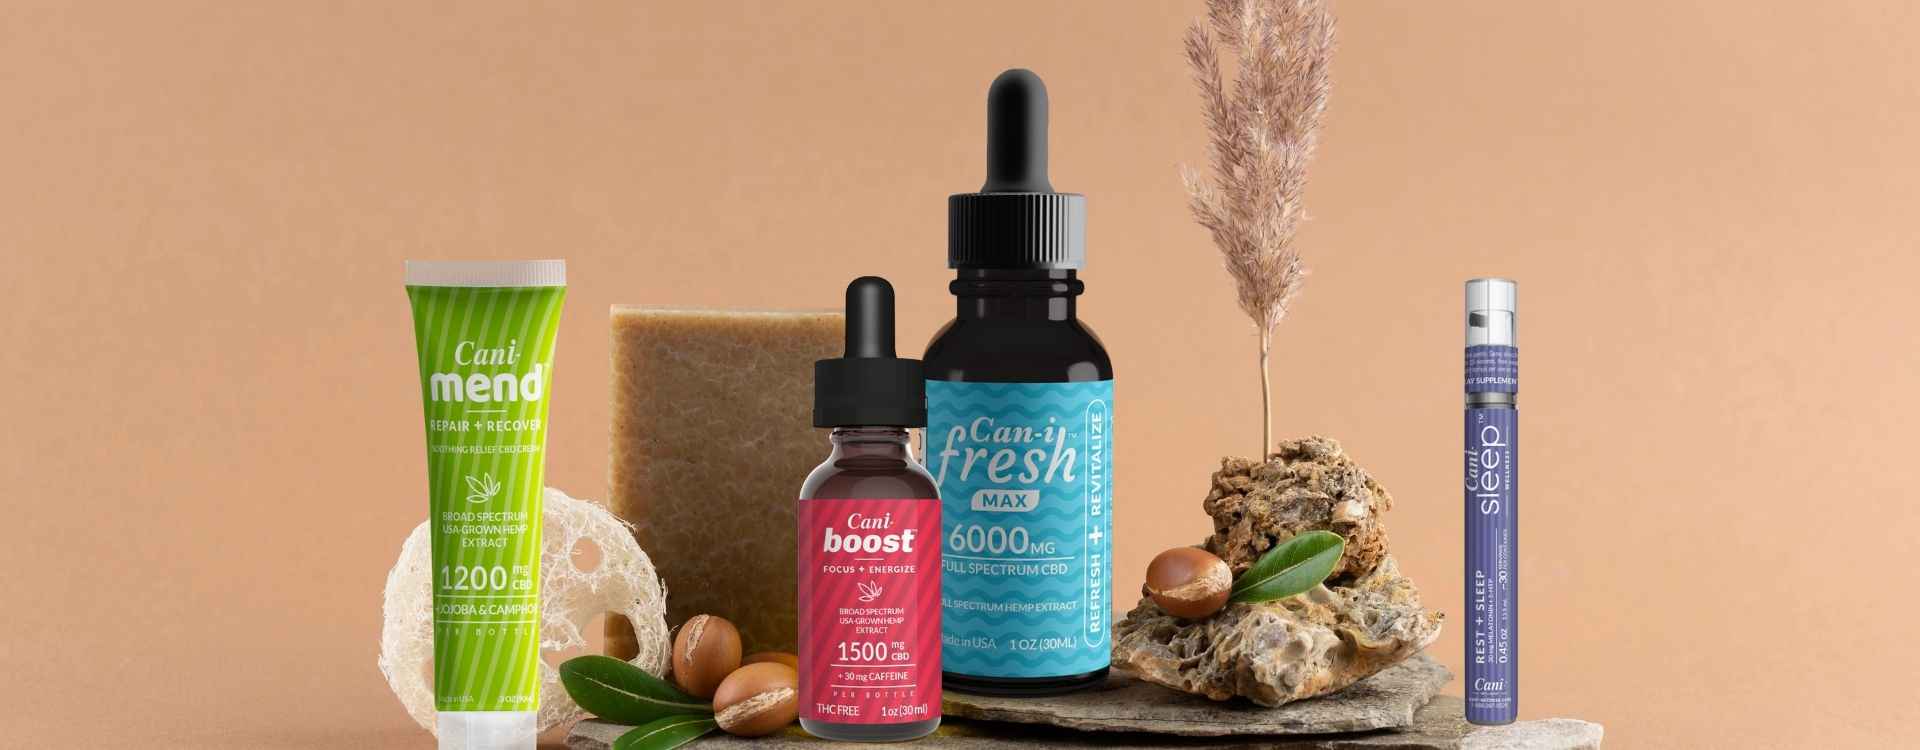 CaniBrands Launches U.S. eCommerce Website for Next-Generation Hemp-Based CBD Products